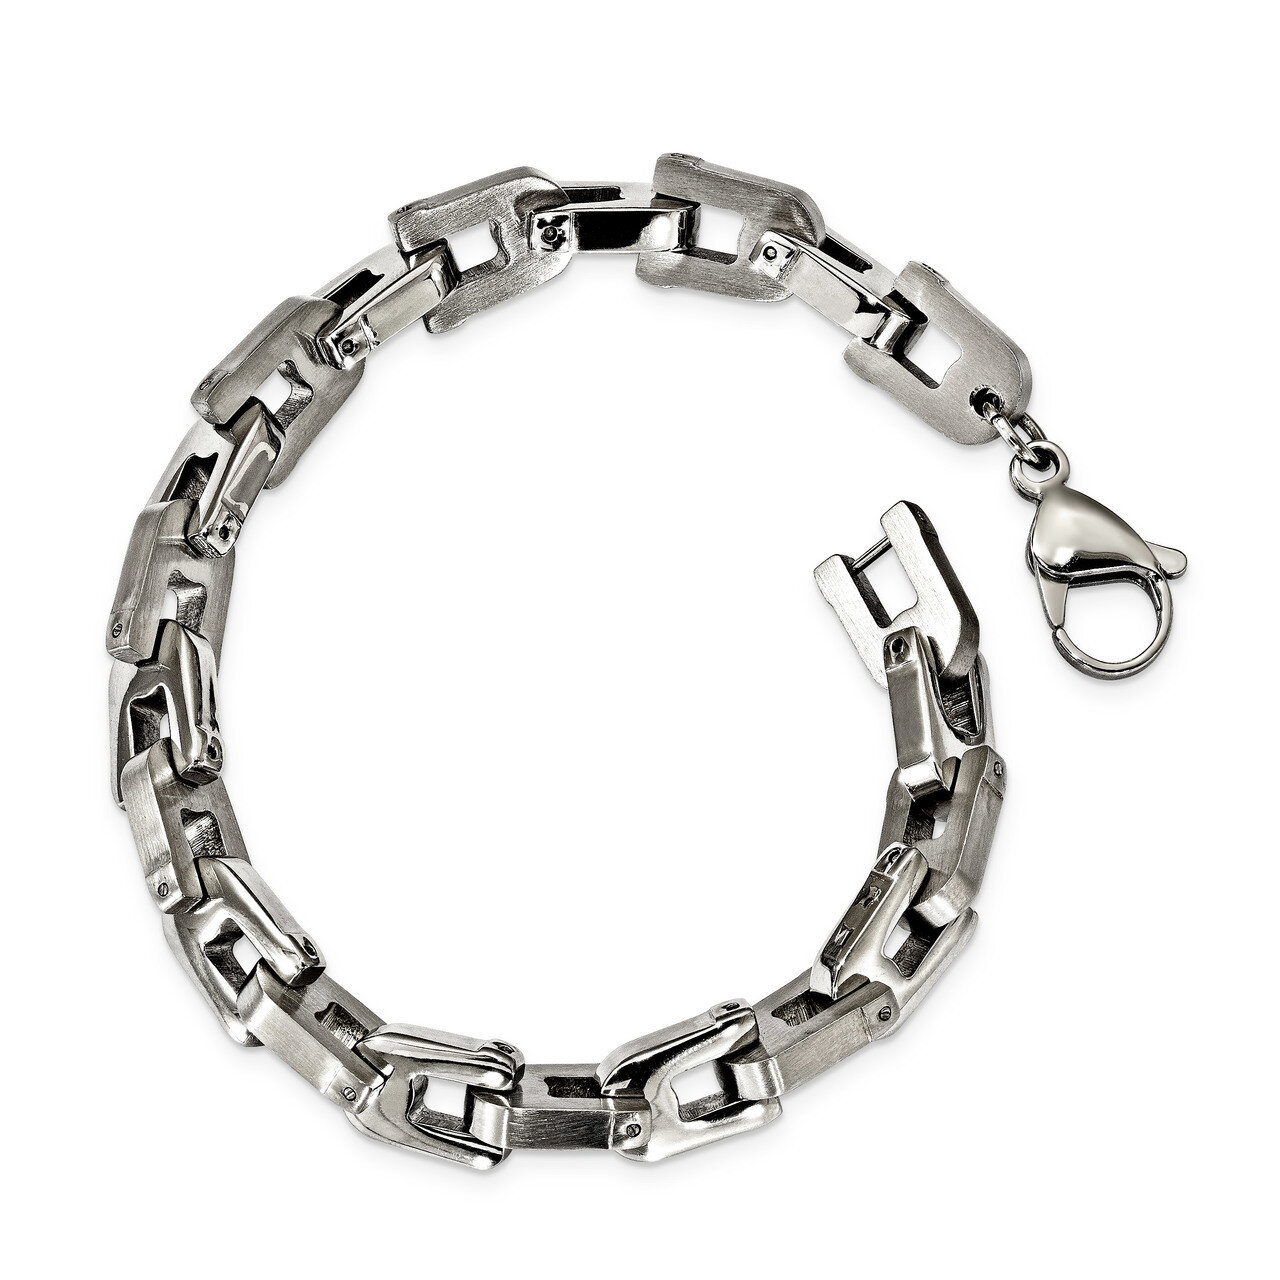 8.5 Inch Bracelet Stainless Steel Brushed and Polished SRB167-8.5